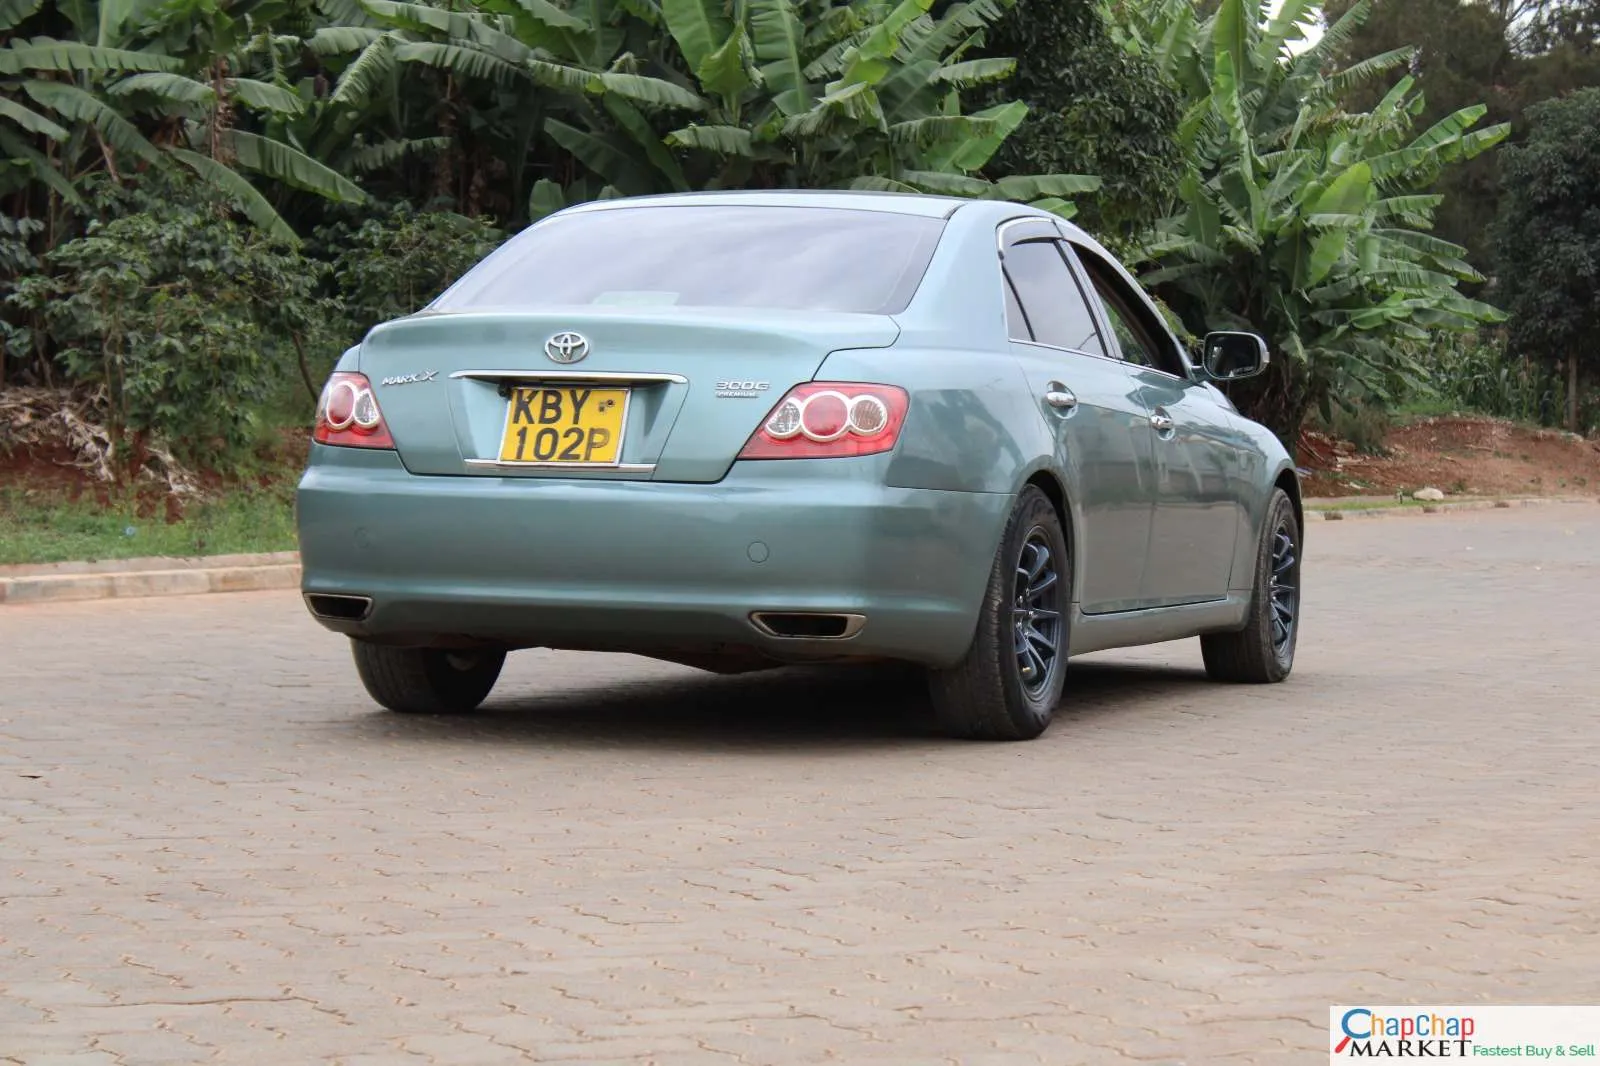 Cars Cars For Sale/Vehicles-Toyota Mark X for sale in Kenya QUICK SALE You Pay 30% Deposit Trade in OK EXCLUSIVE